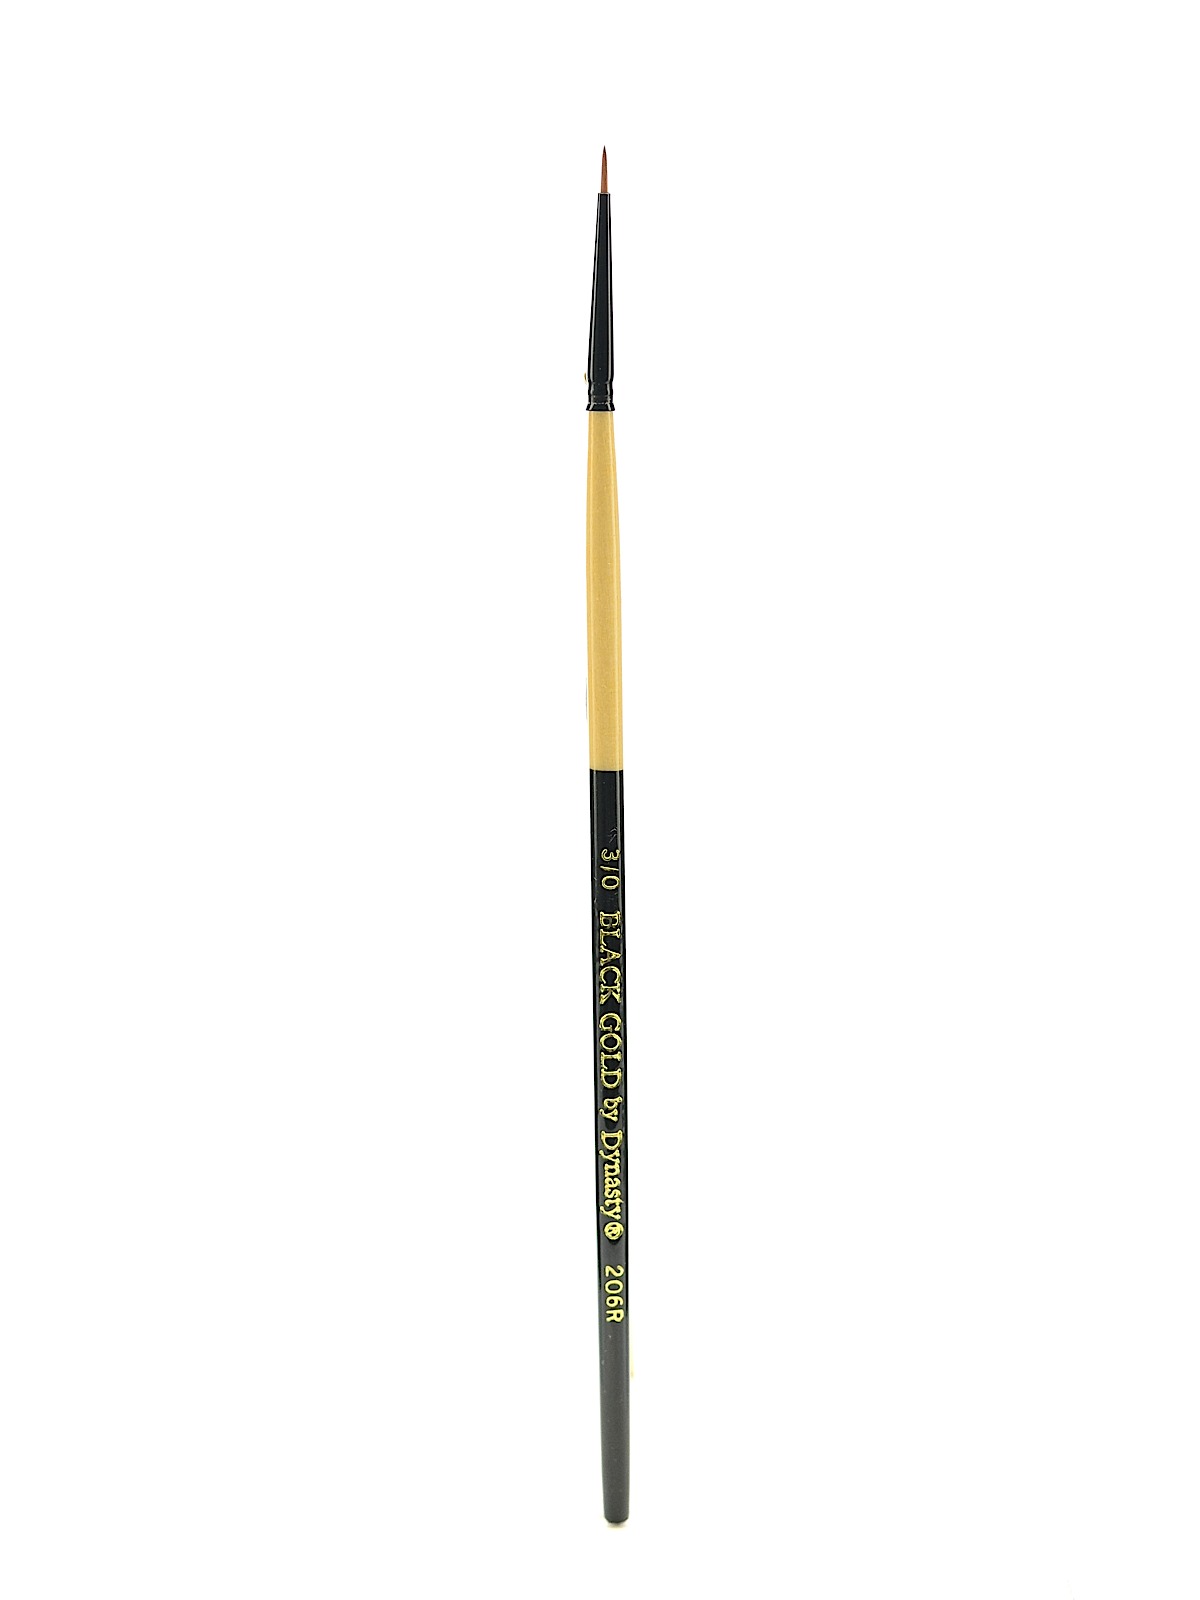 Black Gold Series Synthetic Brushes Short Handle 3 0 Round